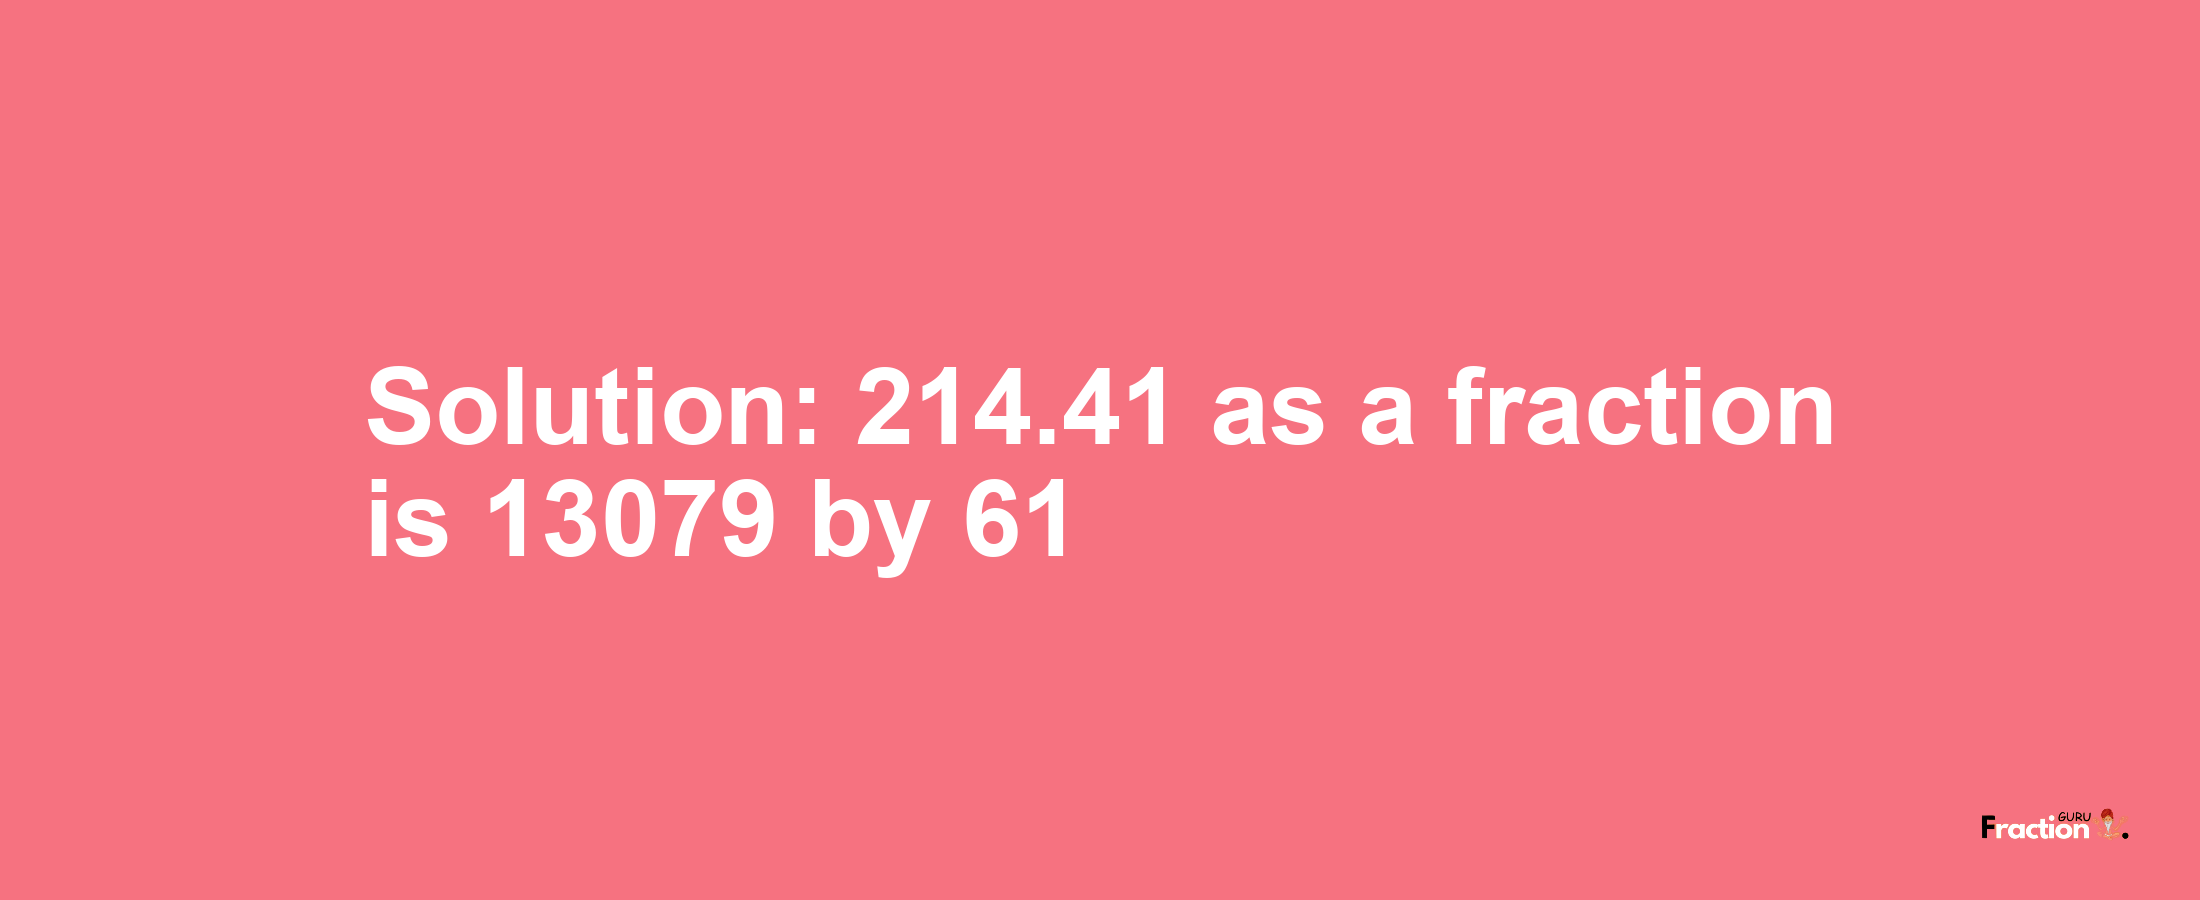 Solution:214.41 as a fraction is 13079/61